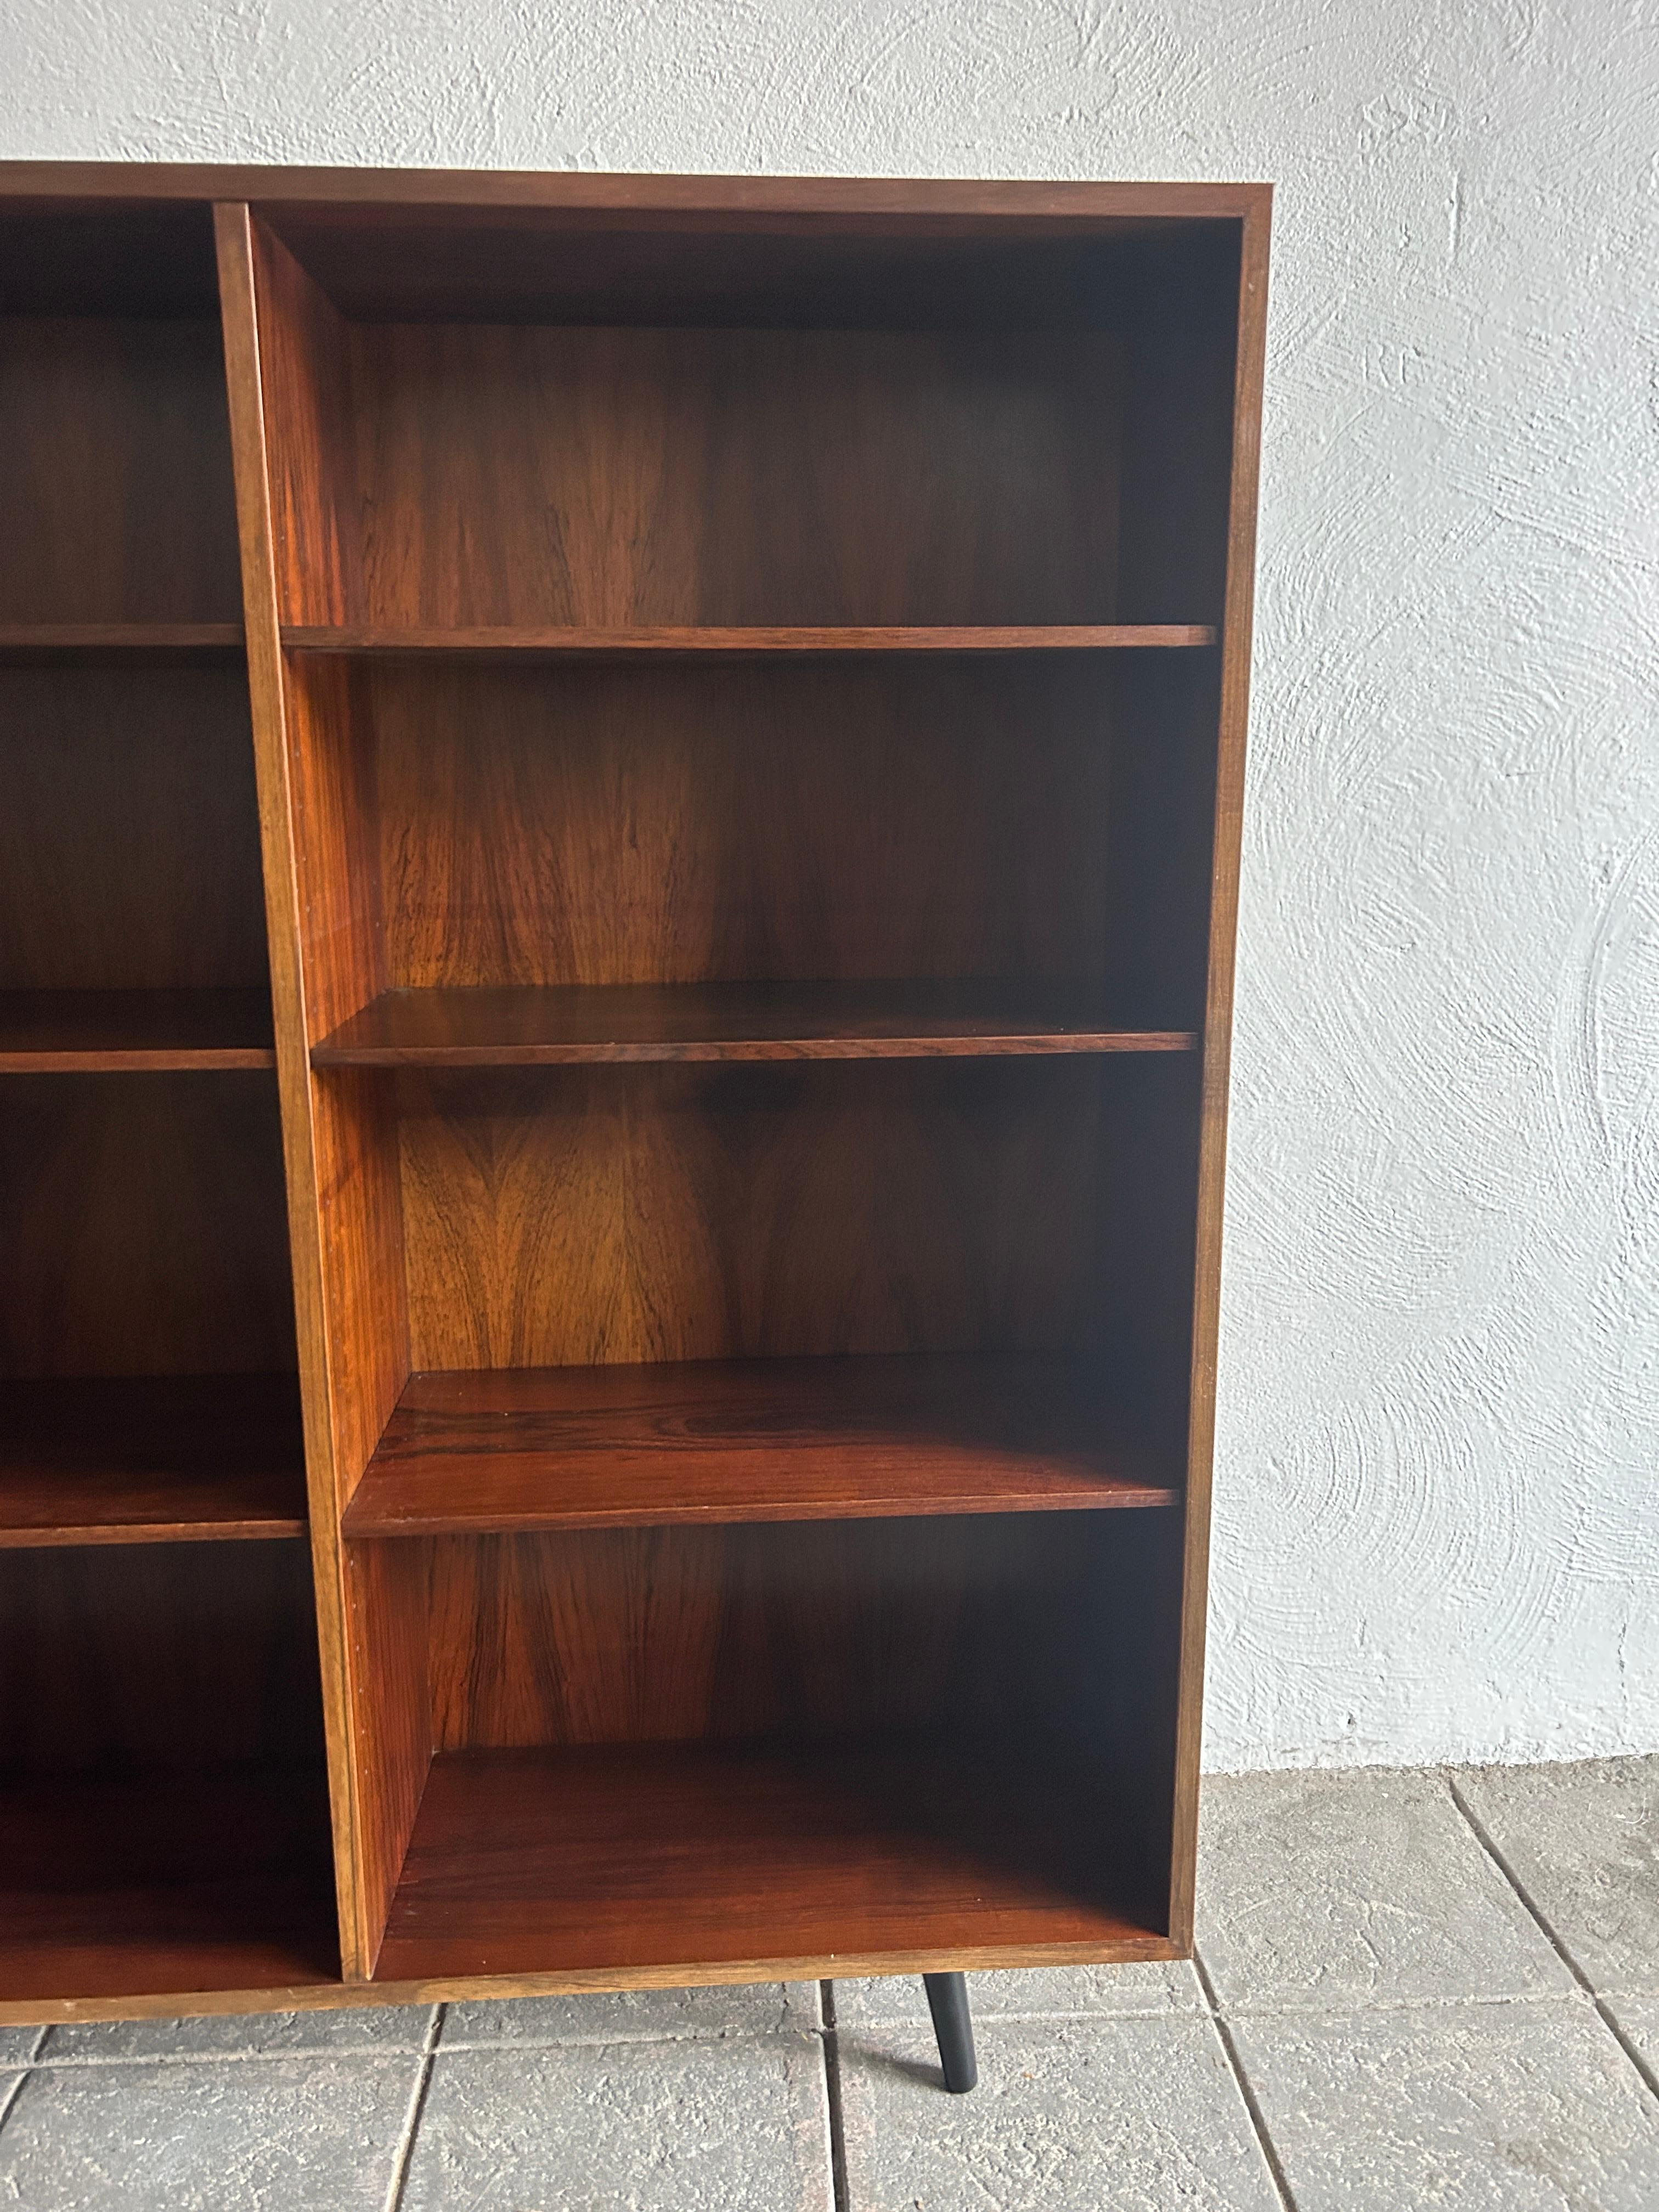 Beautiful simple Danish modern mid century rosewood wide wall floor bookcase. Has 6 adjustable shelves. Amazing rosewood grain! In great vintage condition, circa 1960. Labeled Gunni Omann - made in Denmark.

Measures 47” w x 11.5” d x 53” high